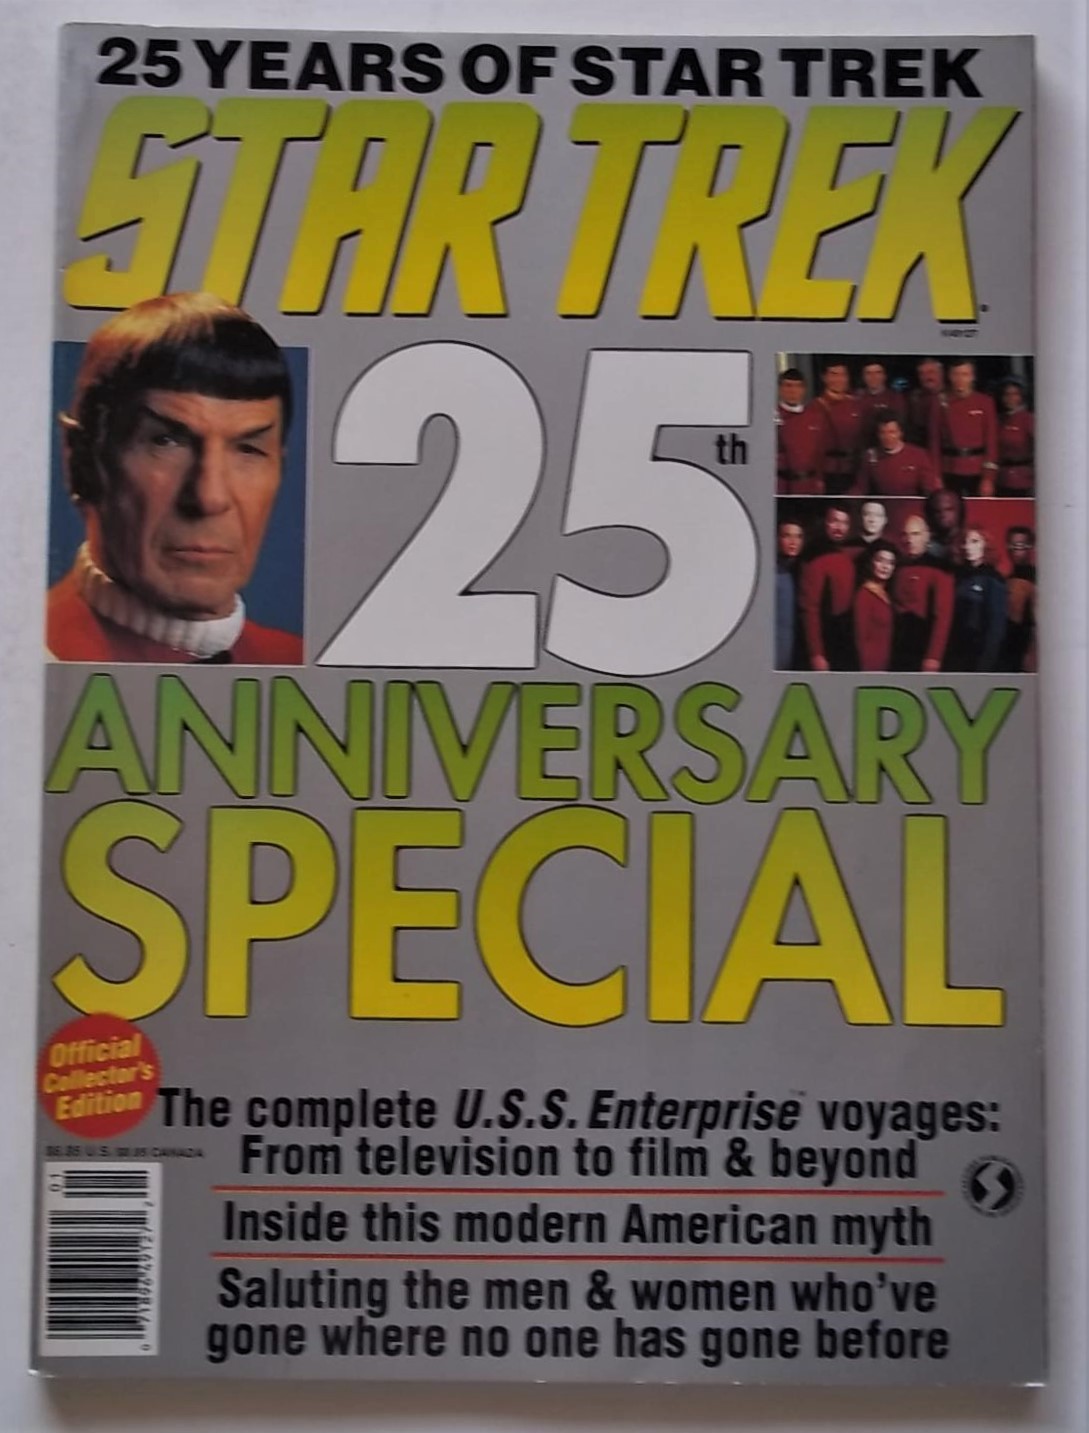 Trek　(President　and　Jacobs　Collector's　25　(1991)　25th　Star　Magazinenbsp;/nbsp;Periodical　Anniversary　Publisher)　of　Edition　David　First　Edition　by　Norman　(Editor):　Special:　McDonnell　Official　and　Star　(Magazine)　Bloomsbury　Trek　Years　Books